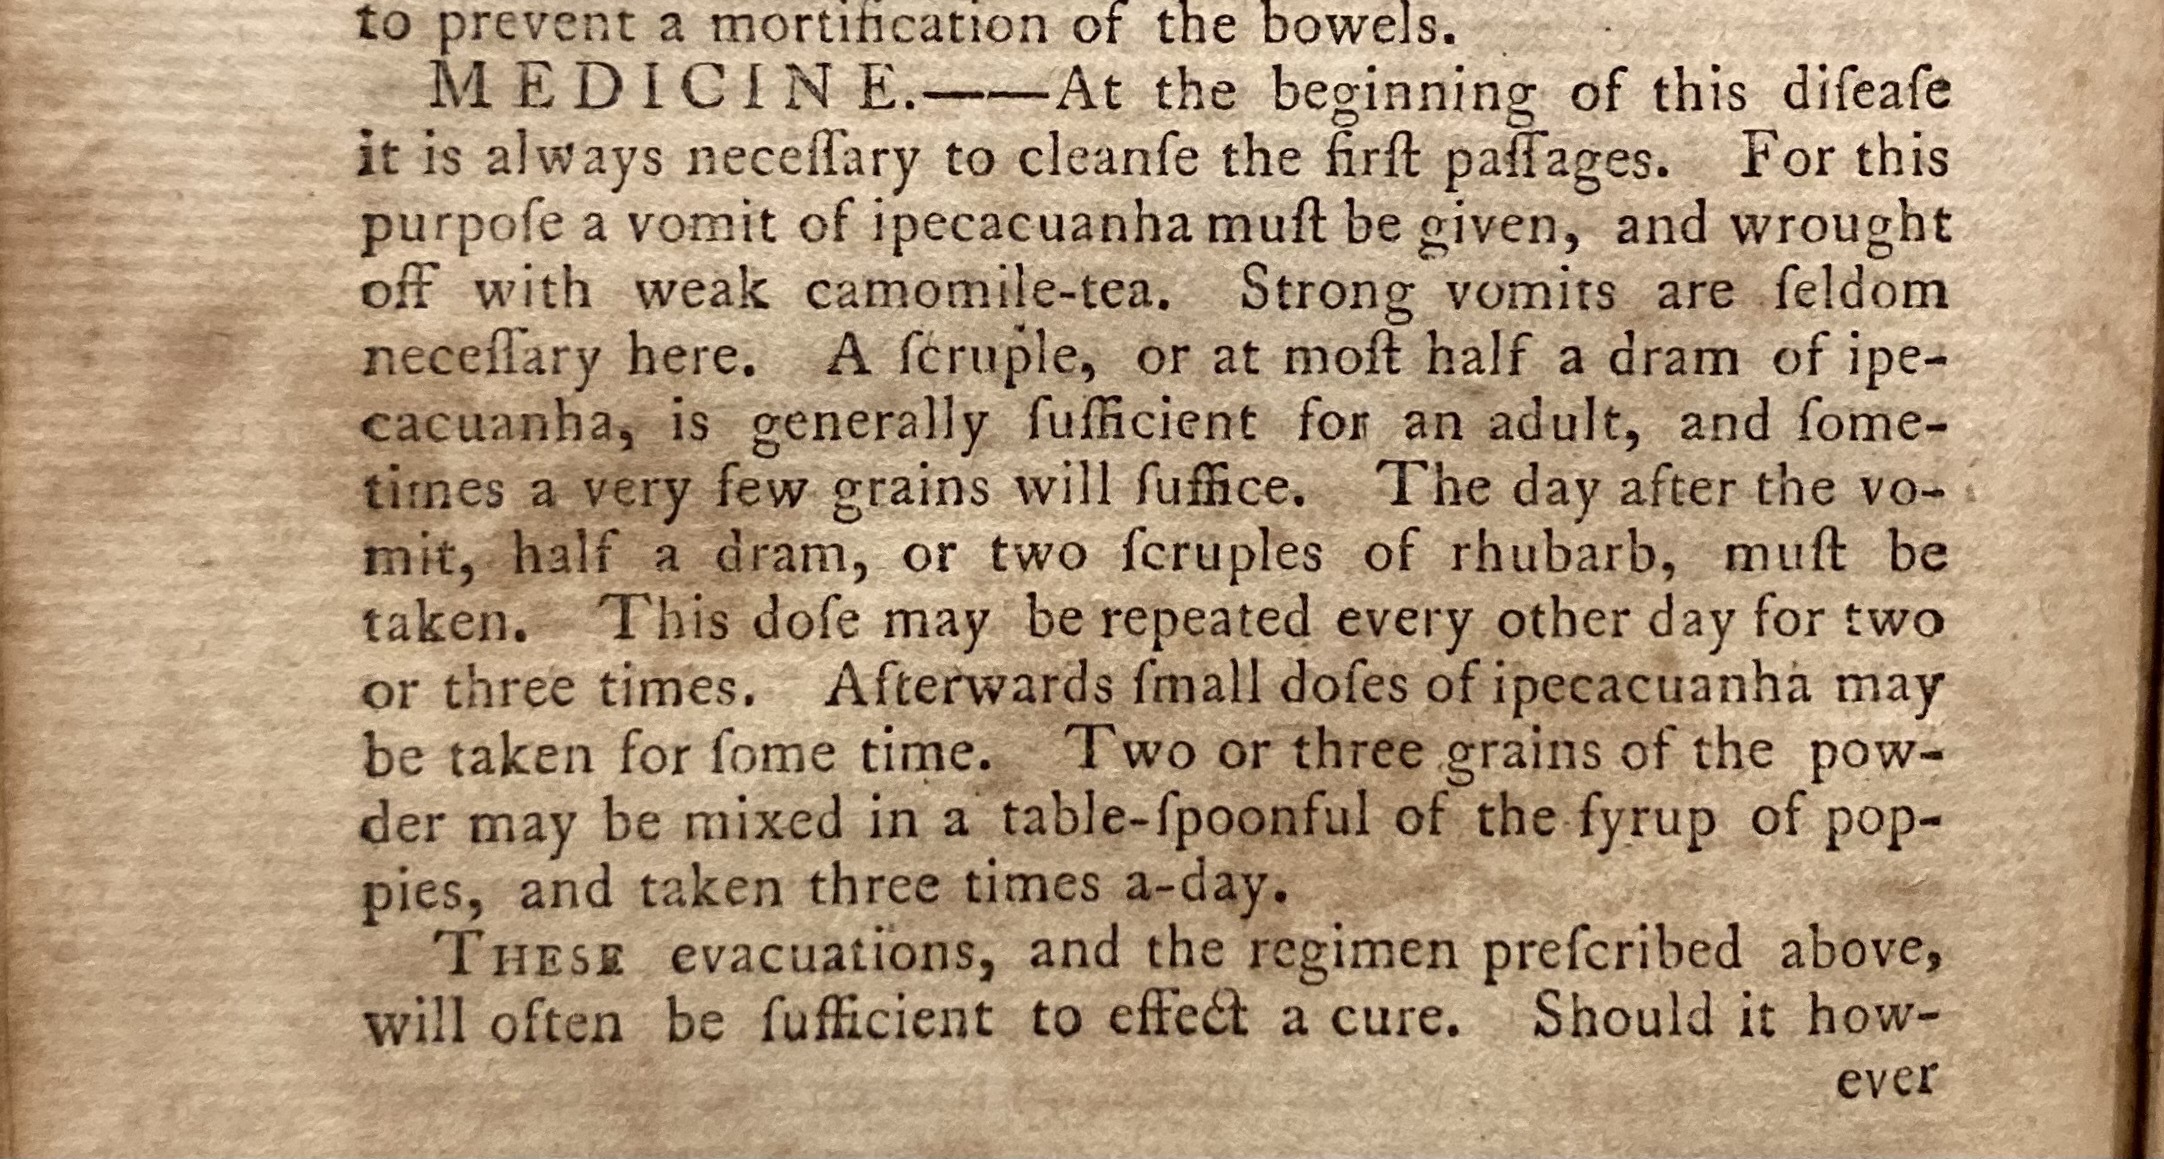 Section of text from  William Buchan’s Domestic Medicine describing the uses of ipecacuanha and rhubarb. 